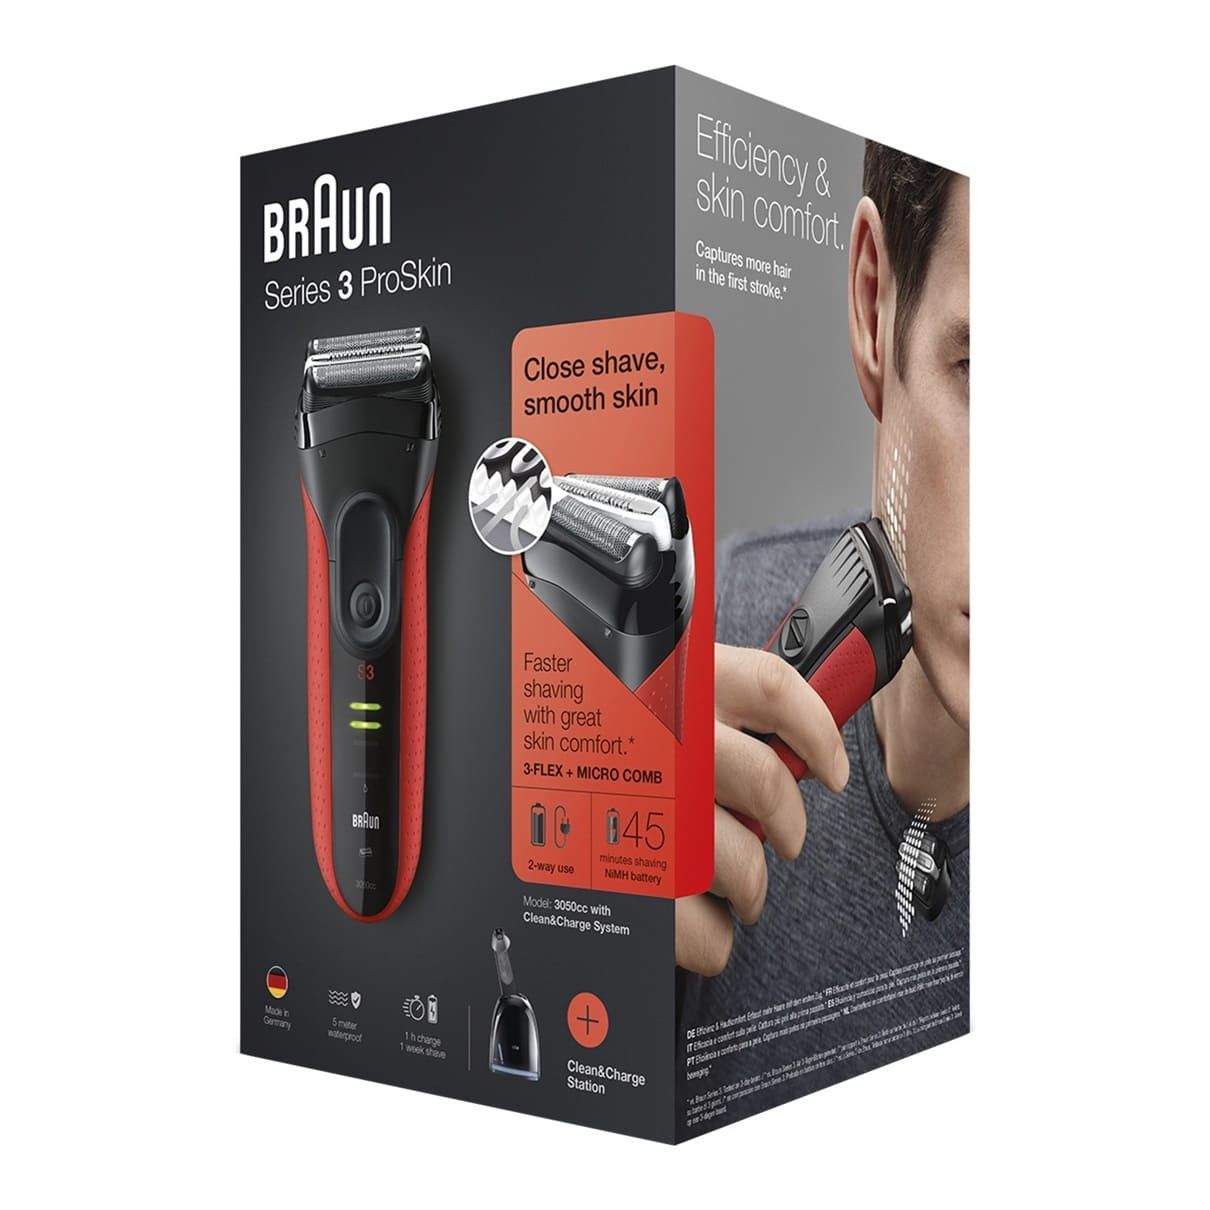  Braun Series 3 ProSkin 3050cc, 81585586,   Clean&Charge, Red